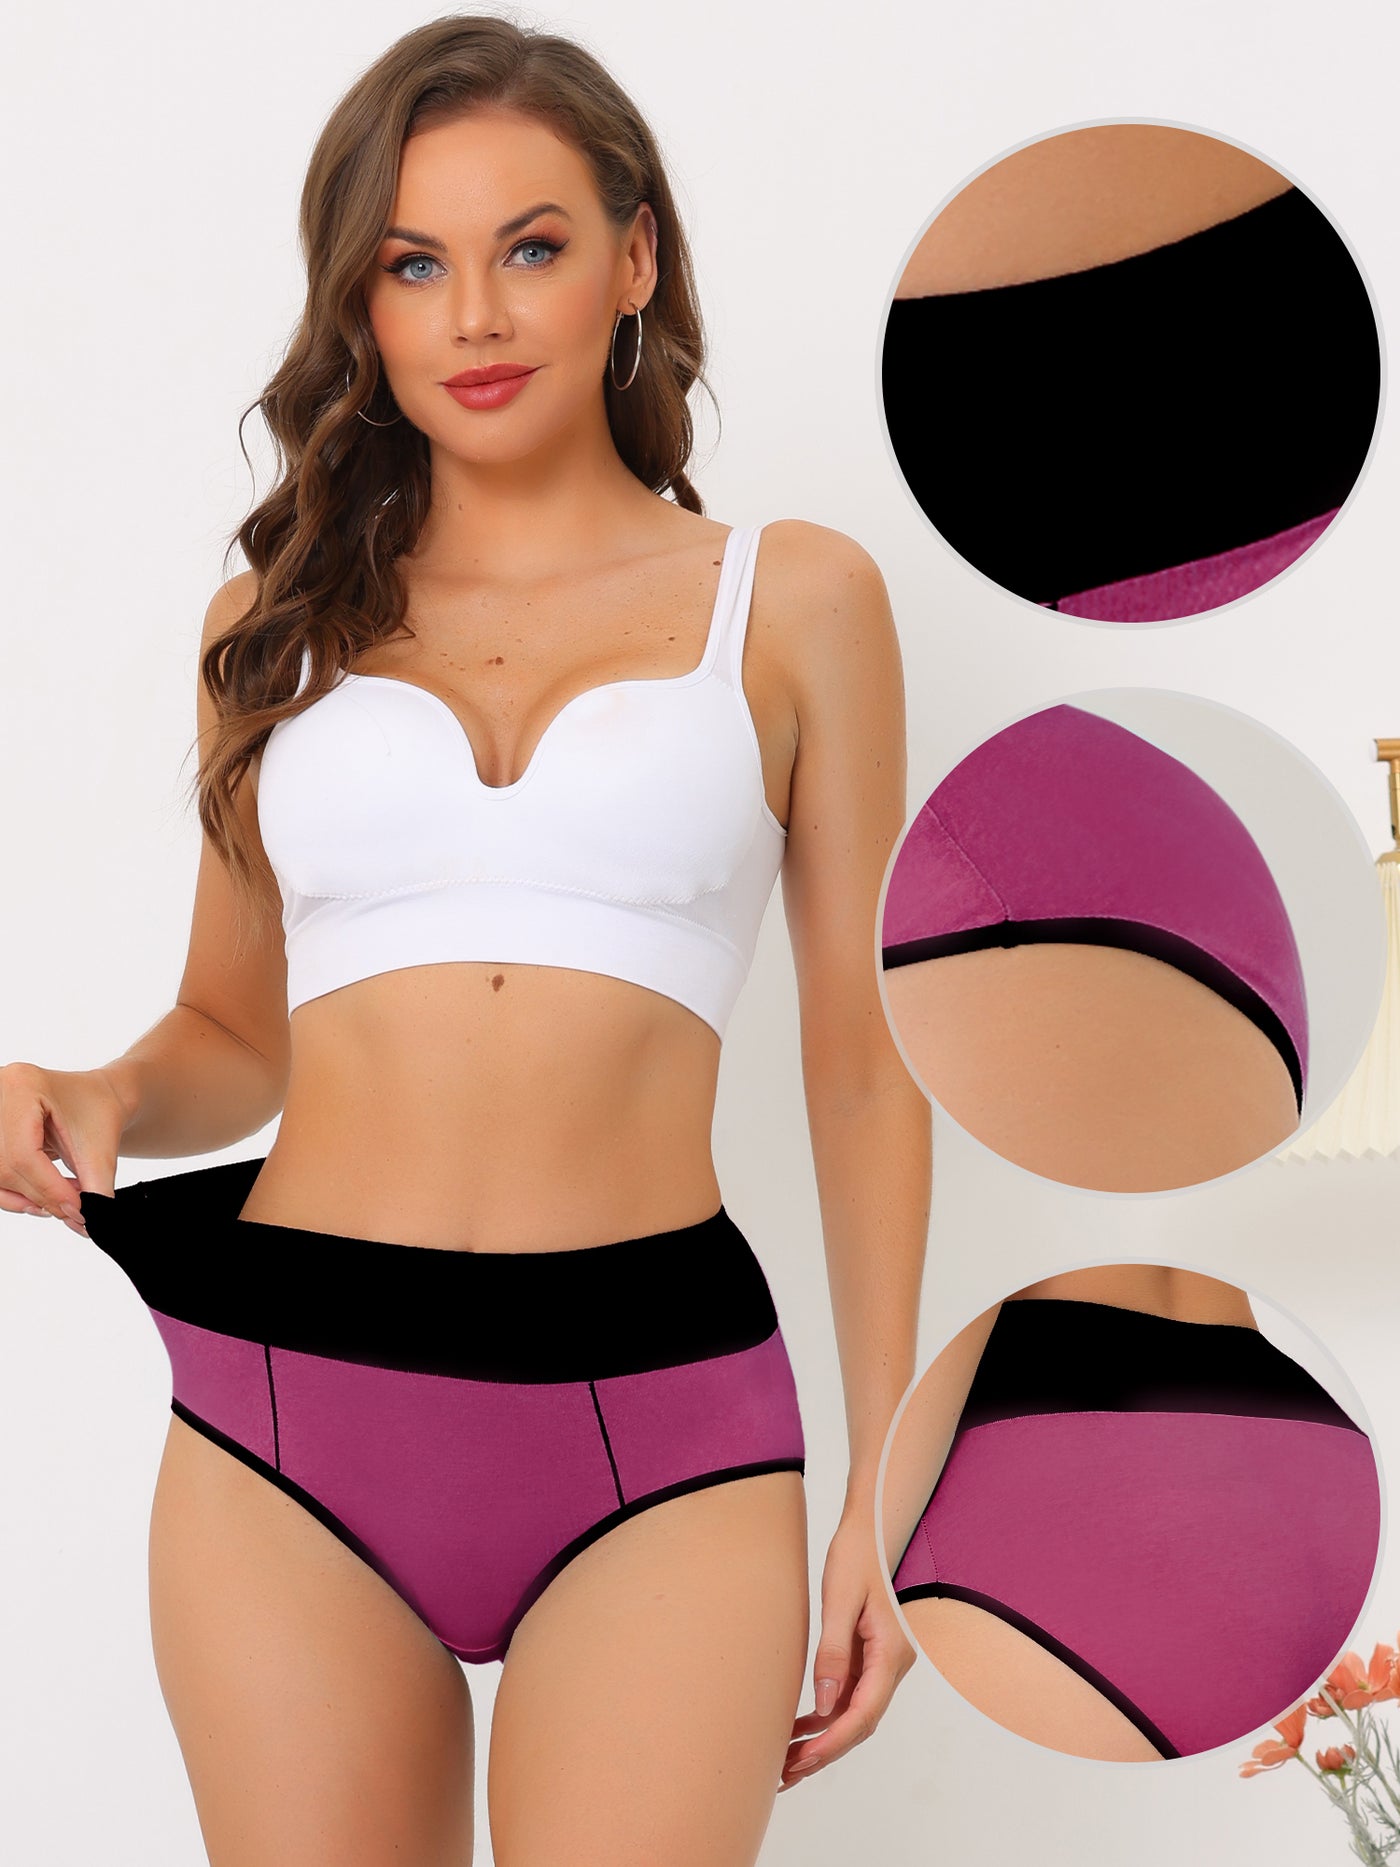 Allegra K Women's High Waist Tummy Control Color-Block Brief, Available in Plus Size